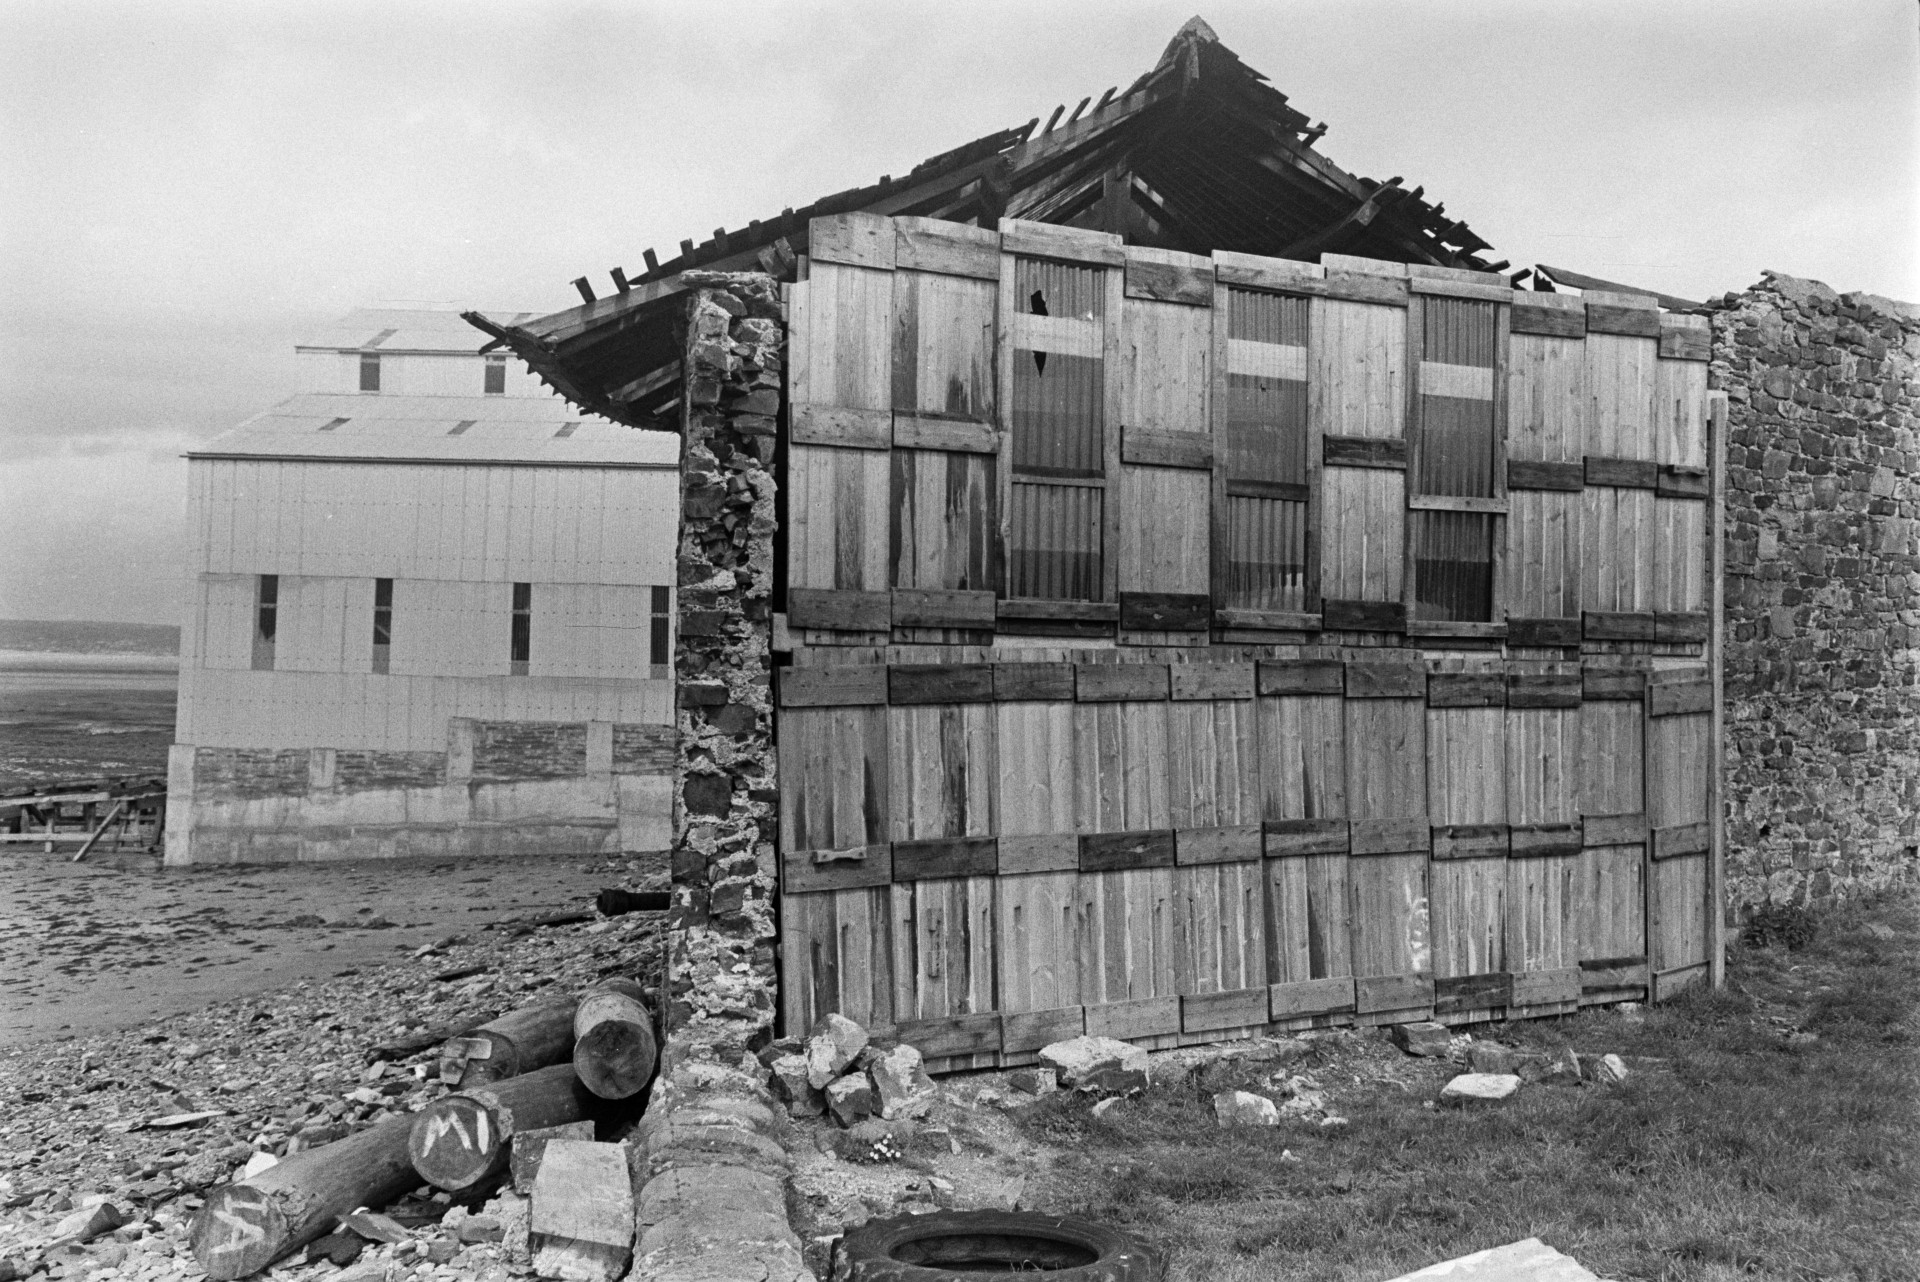 Buildings at Appledore shipyard. A stone and wooden building with a collapsing roof is visible in the foreground.